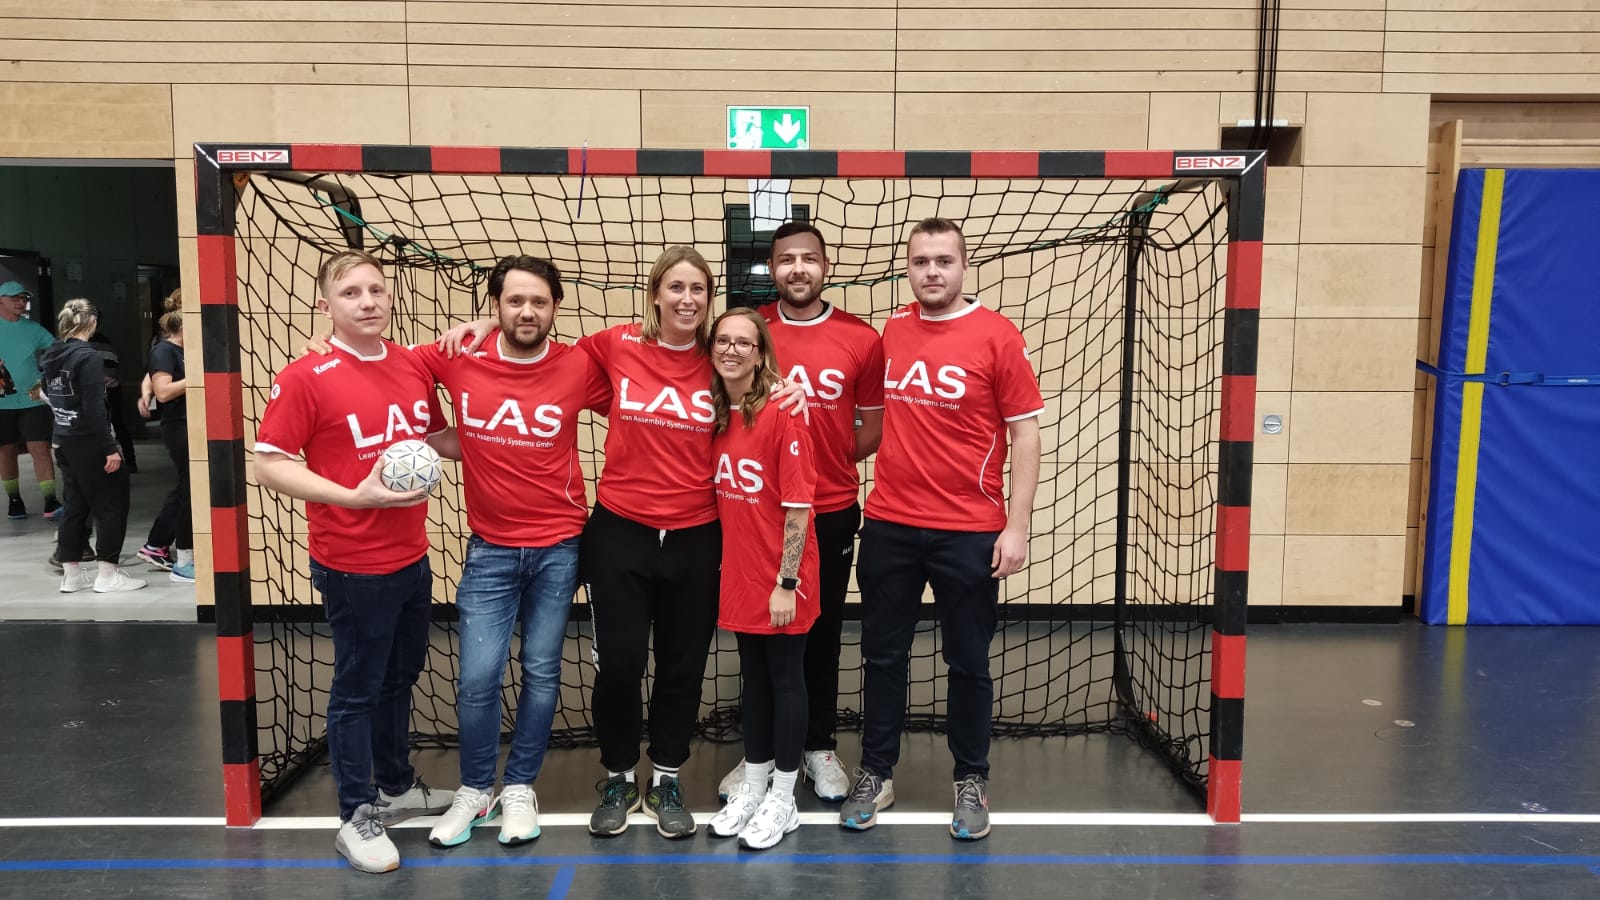 Six LAS employees in company jerseys stand in a handball goal